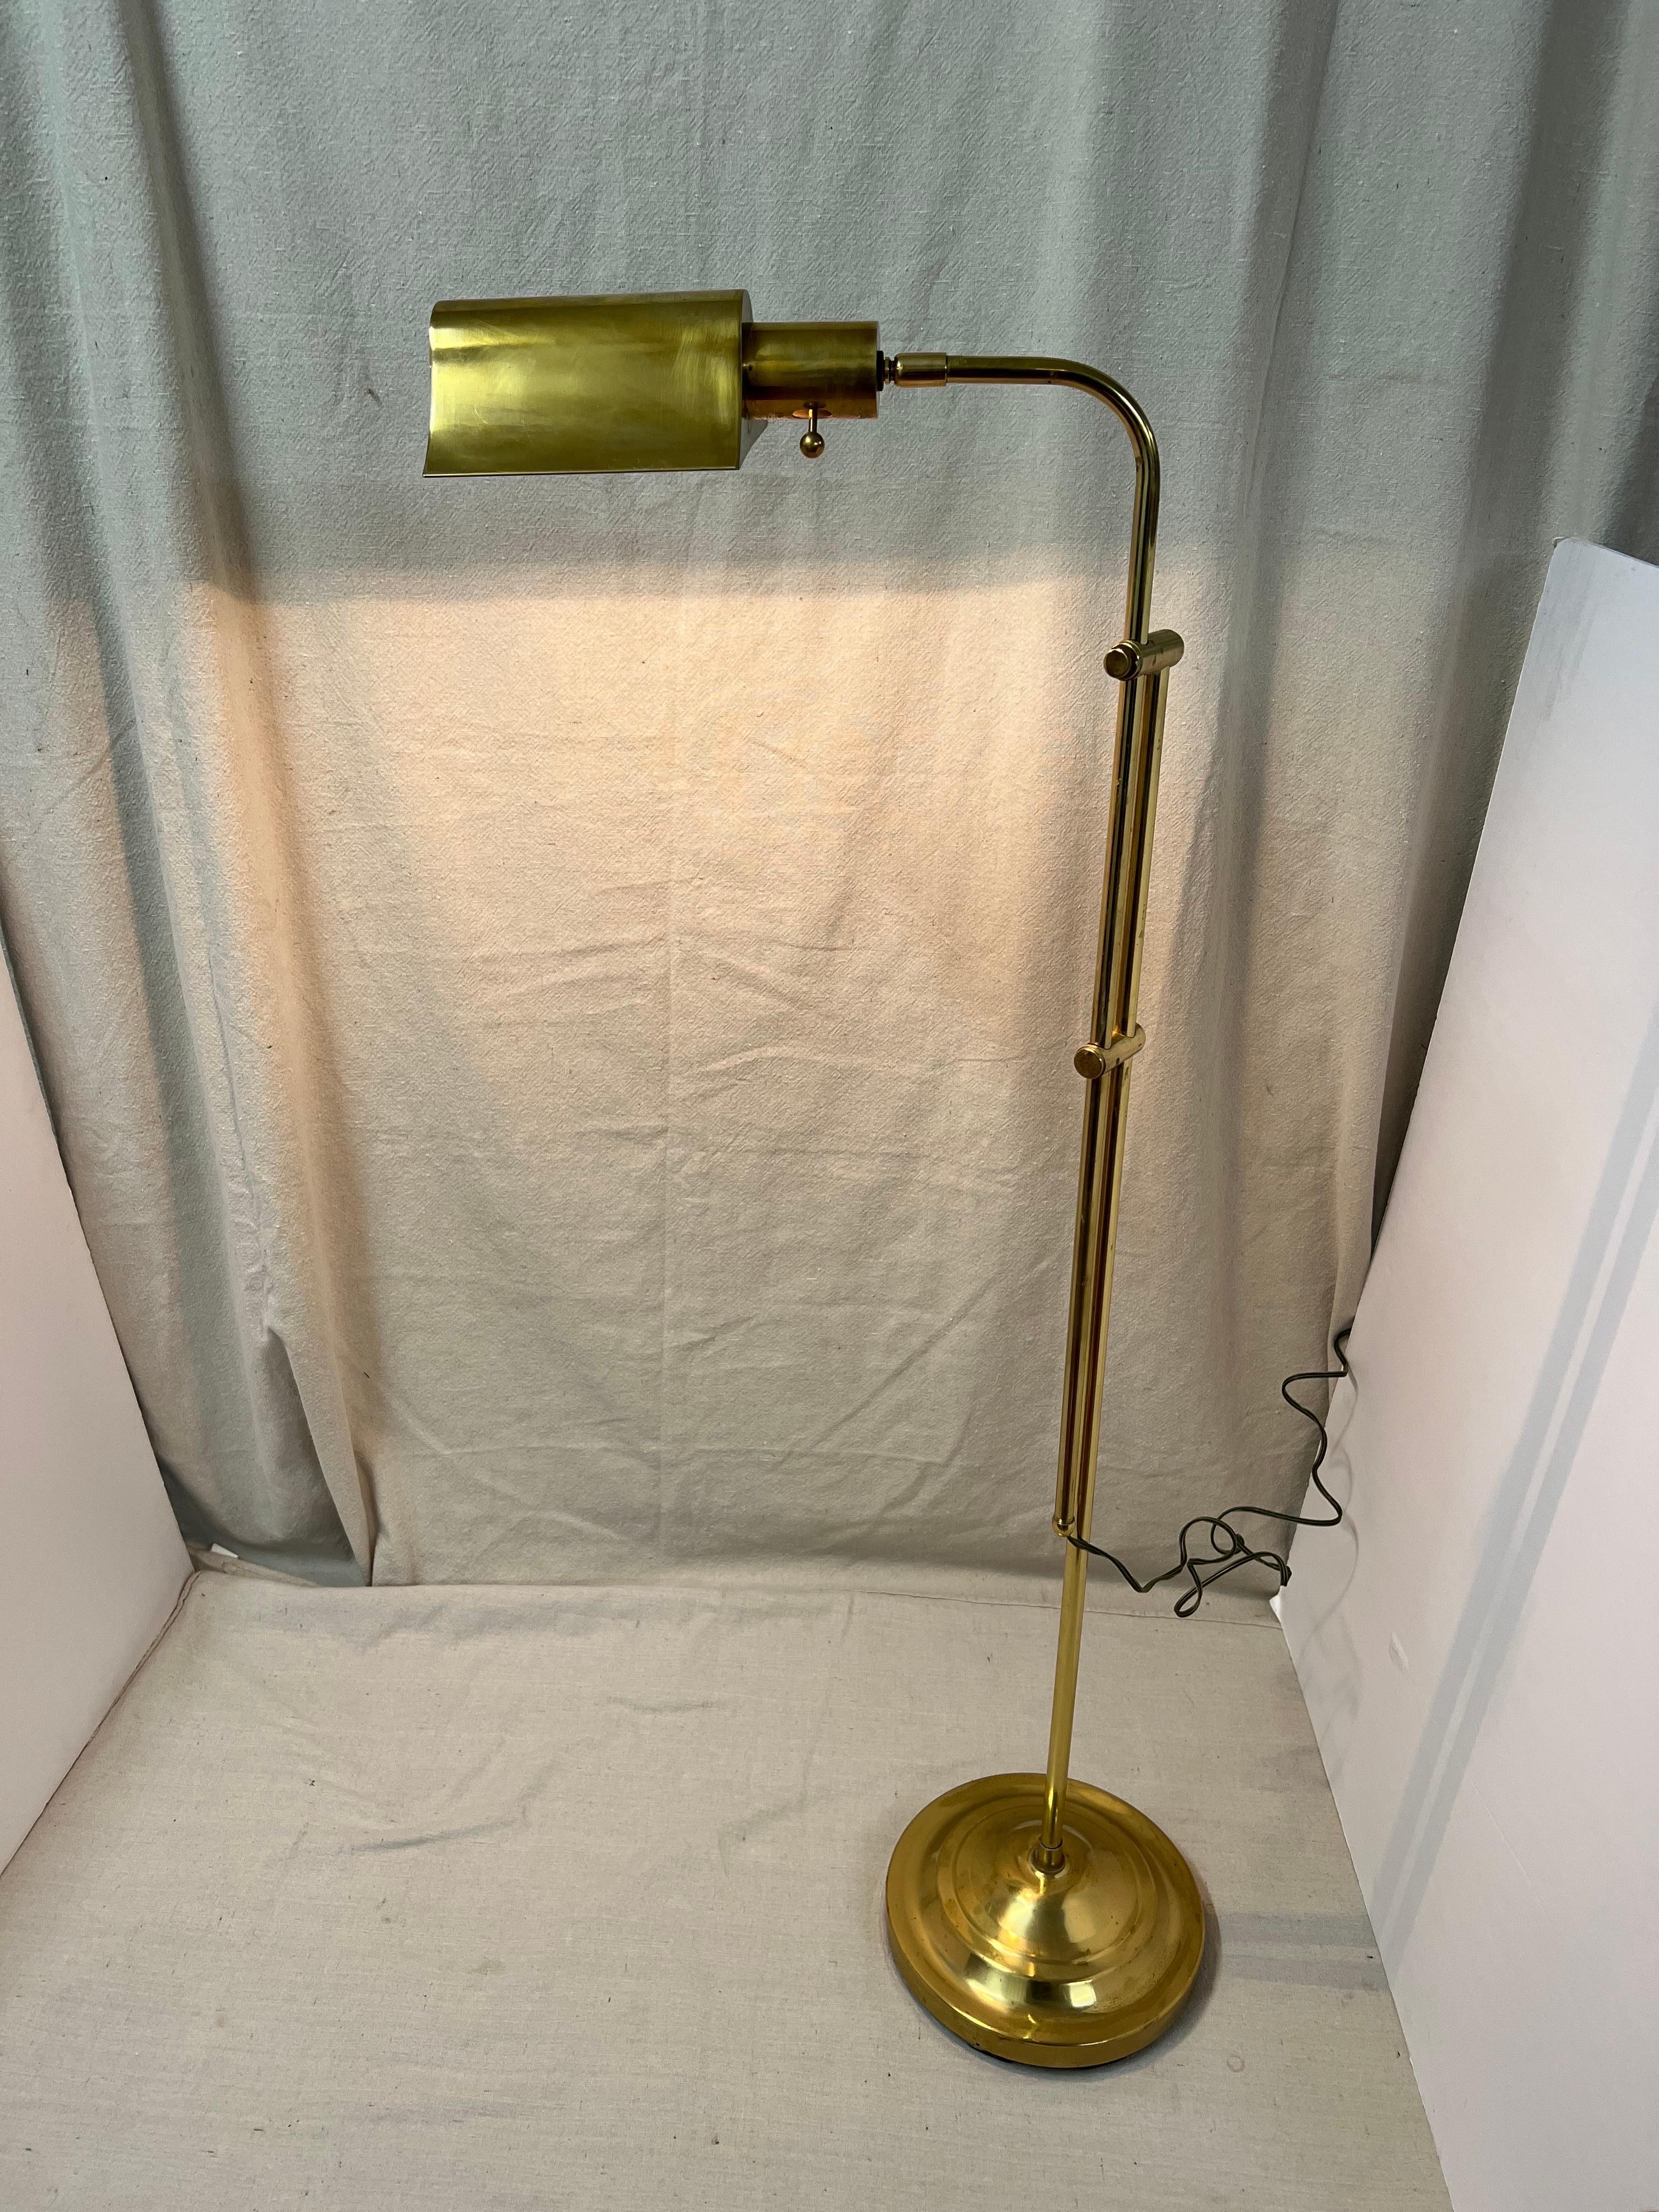 Stiffell style brass pharmacy floor lamp. Adjustable height and swivel neck. Perfect as a reading lamp.

Please check dimensions and ask for more photos before purchase.